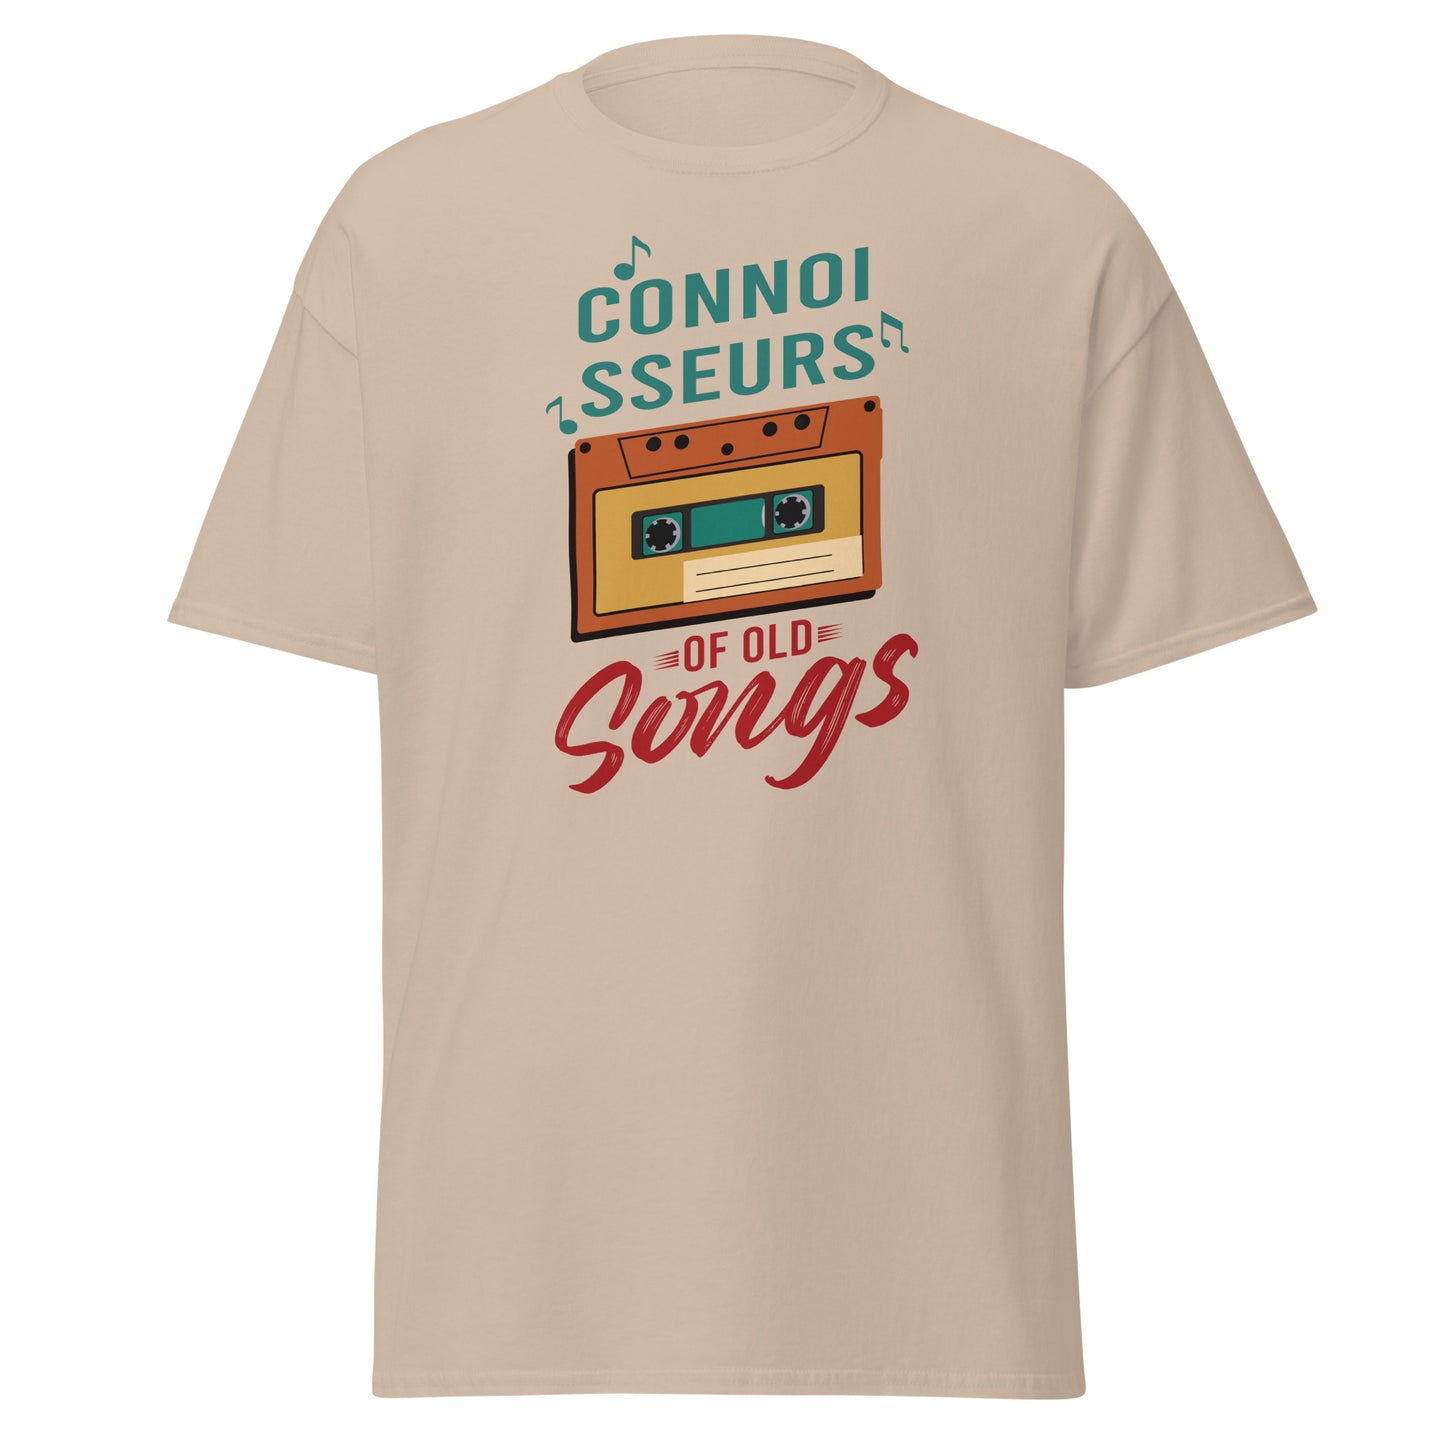 Connoisseurs of Old Songs Shirt